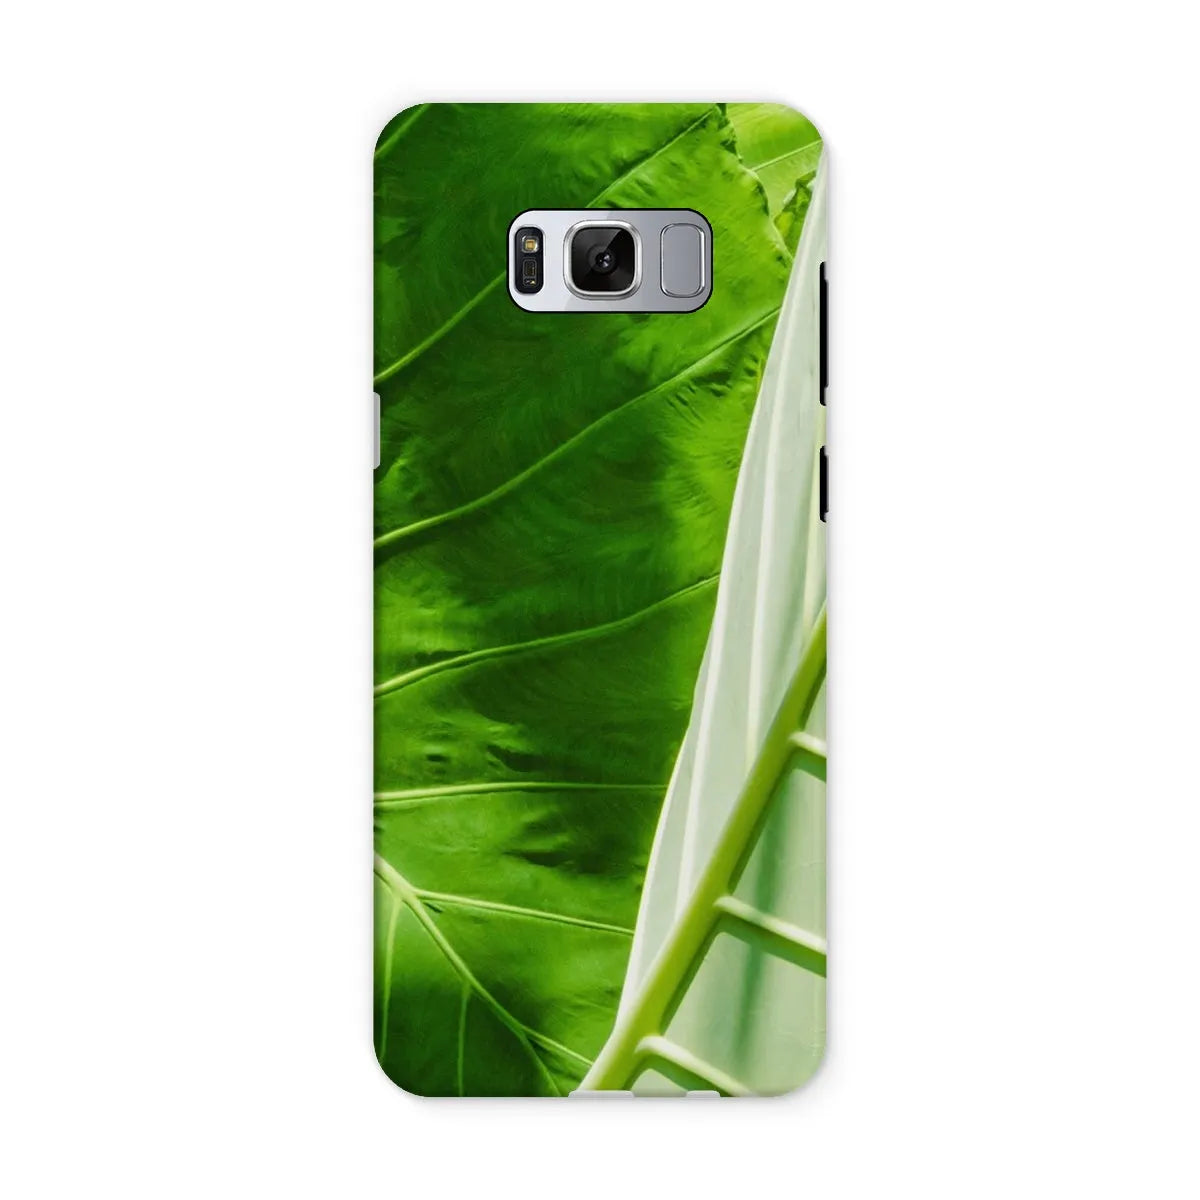 Clash Of The Hulks Tough Phone Case - Samsung Galaxy S8 / Matte - Mobile Phone Cases - Aesthetic Art